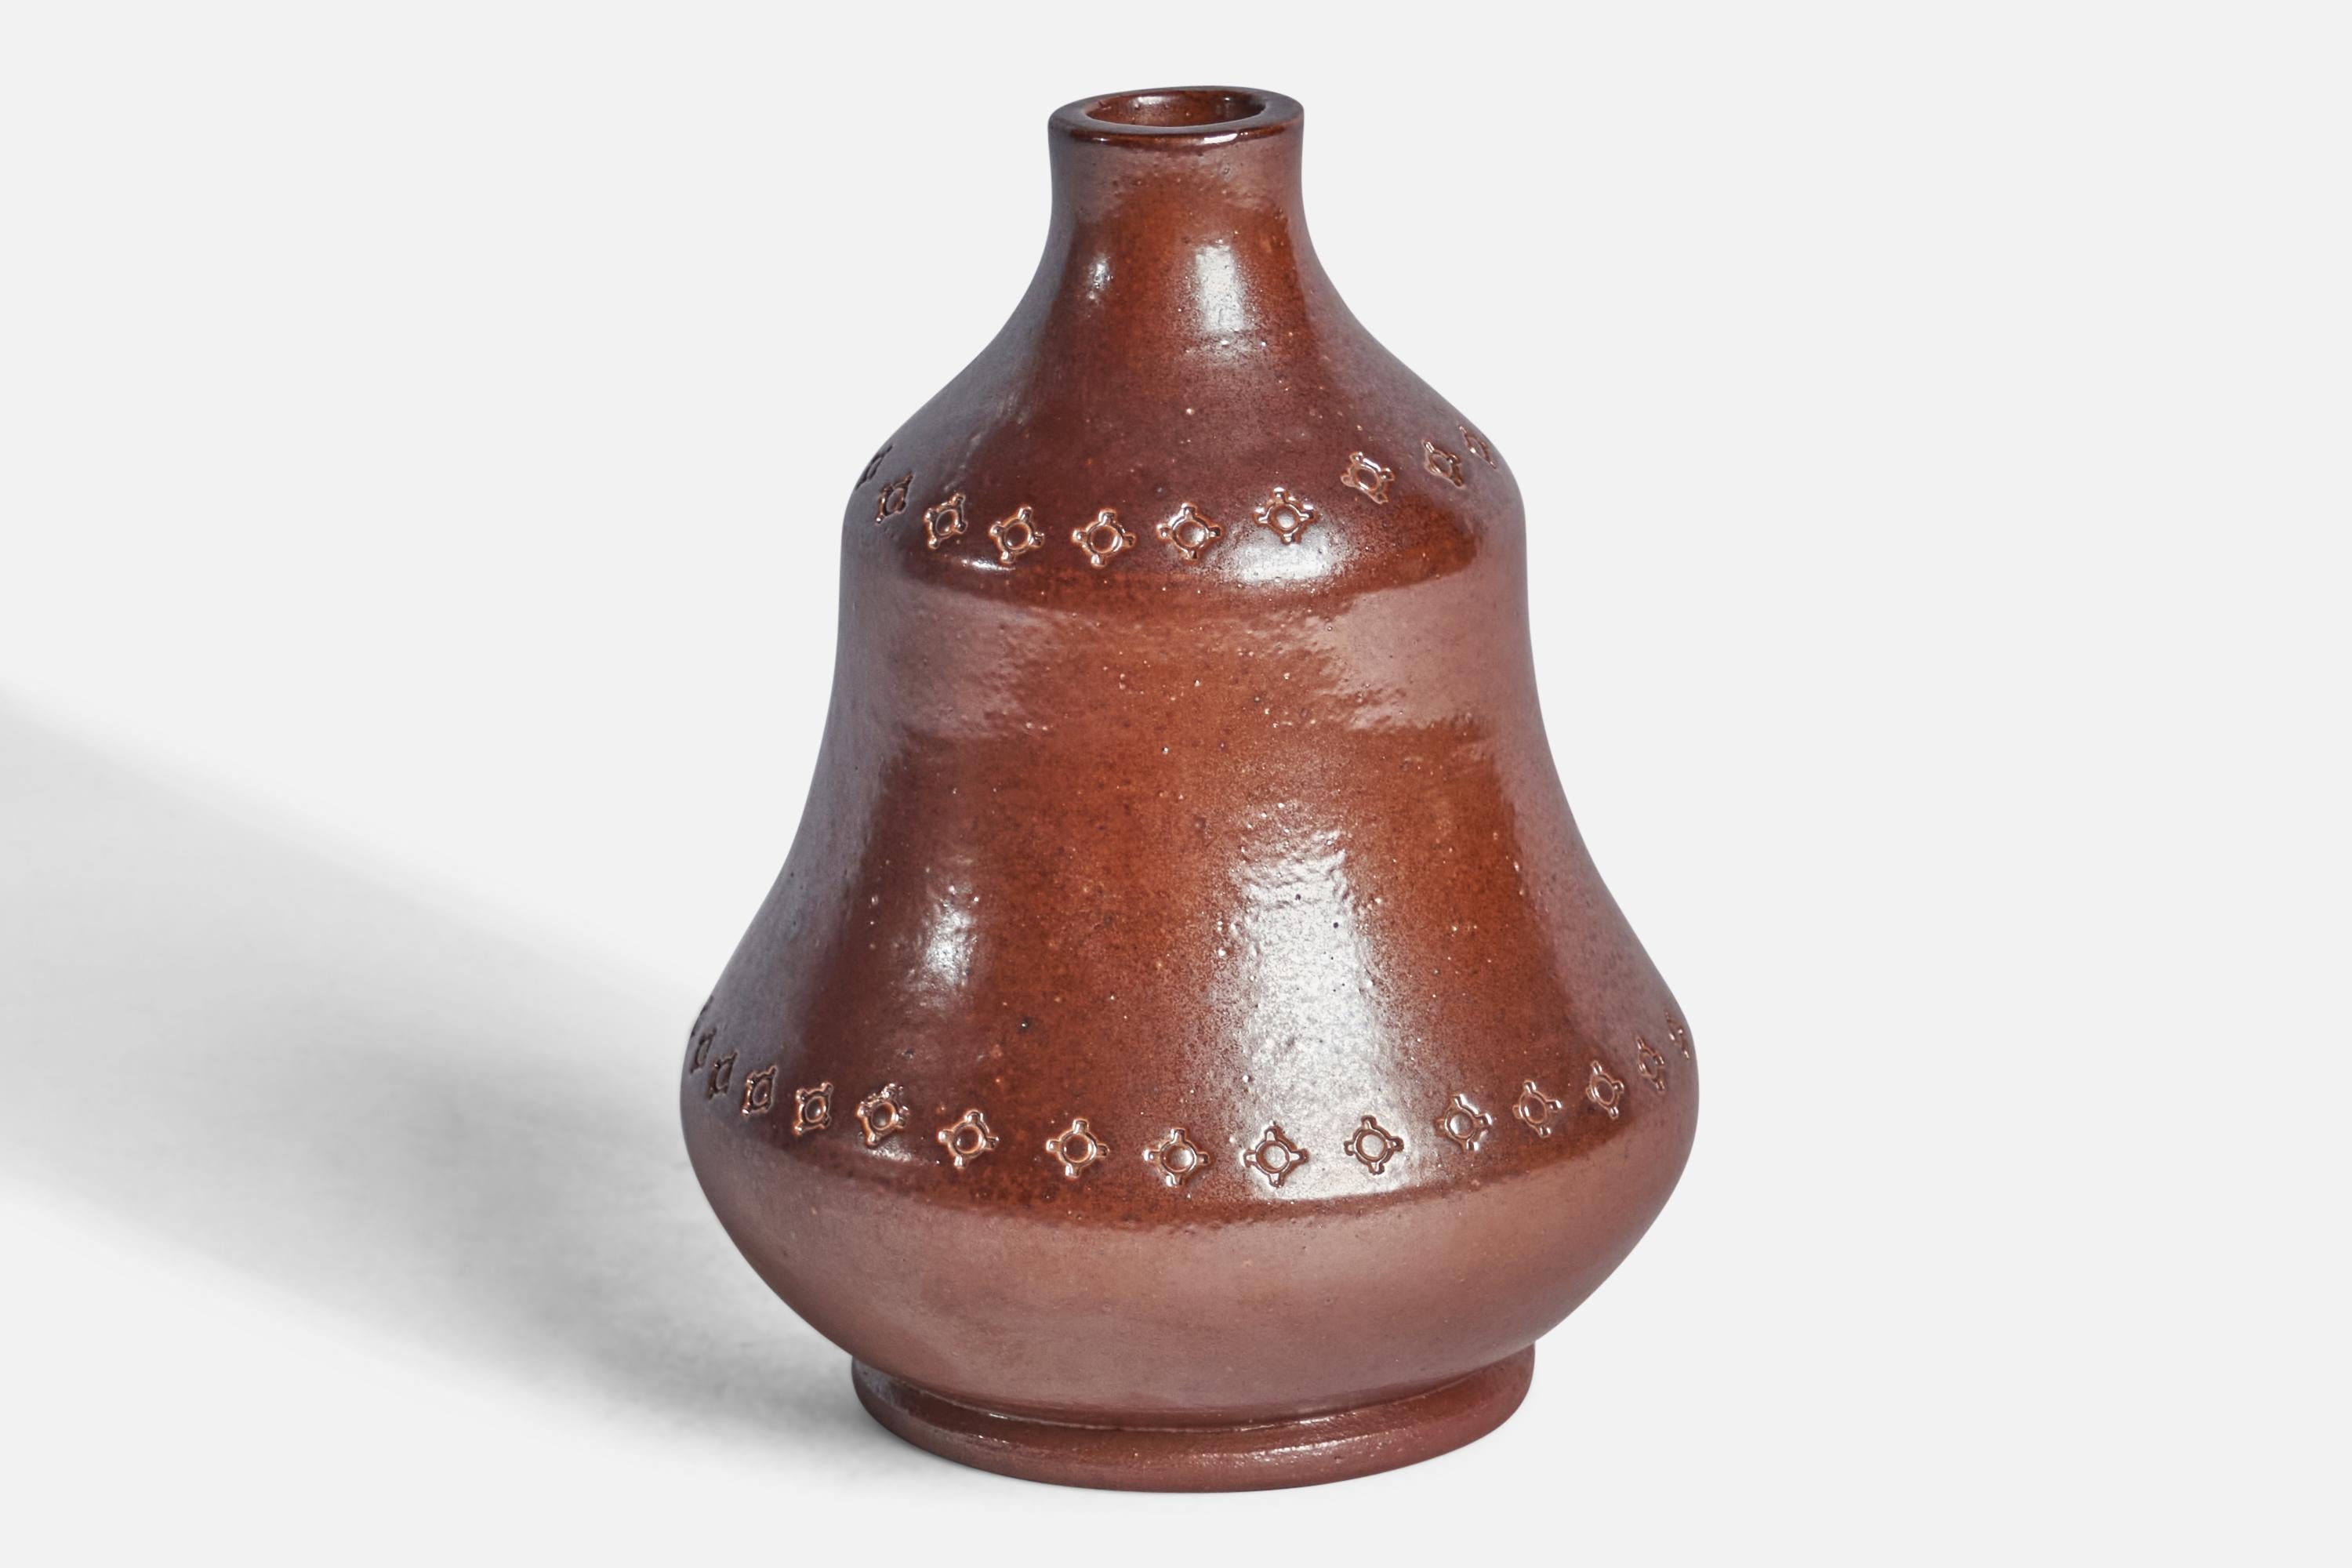 A brown-glazed stoneware vase designed by Karl Persson and produced by Höganäs Keramik, Sweden, 1940s.